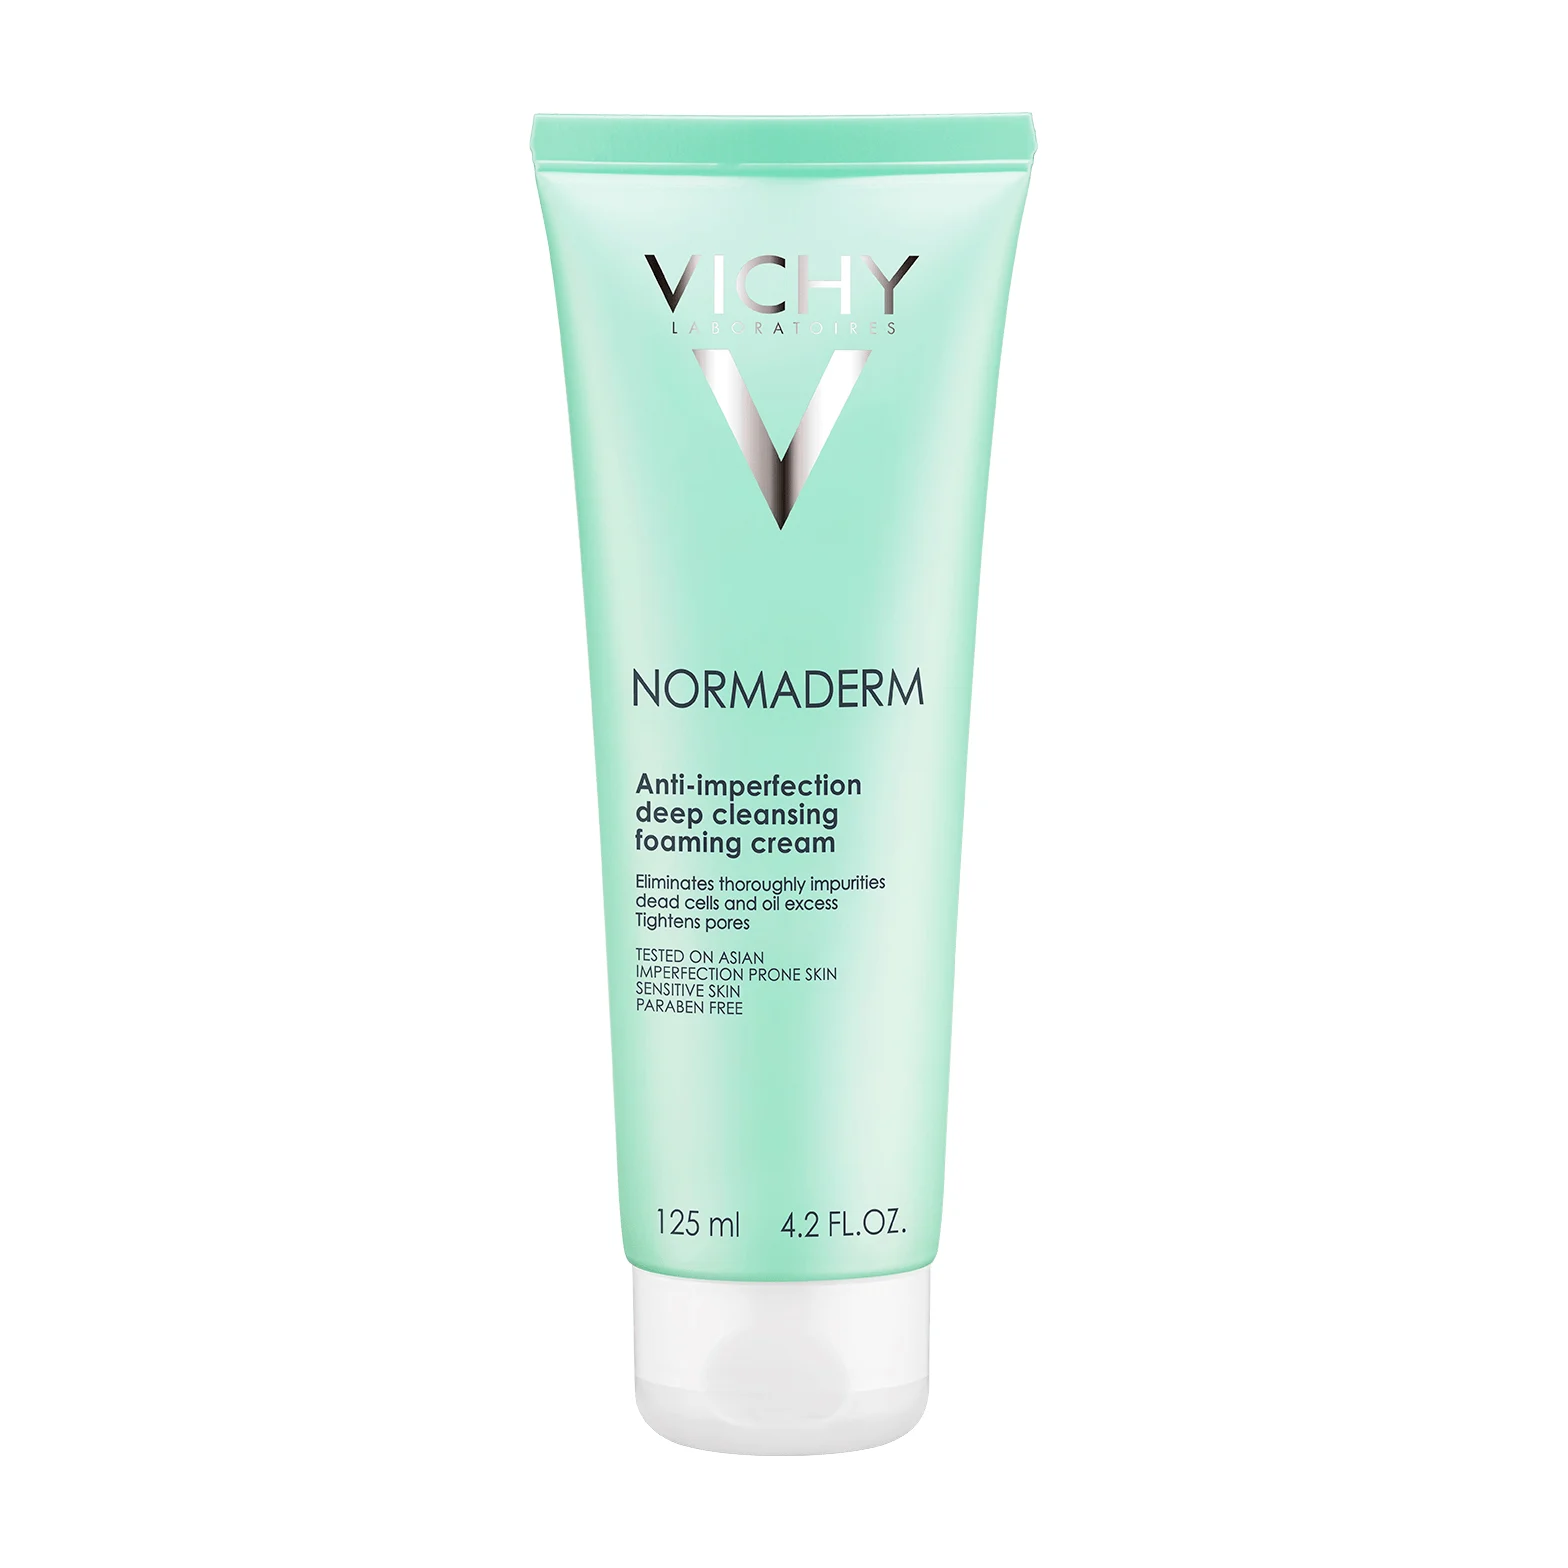 Sữa rửa mặt Vichy Normaderm Anti-Imperfection Deep Cleansing Foaming Cream